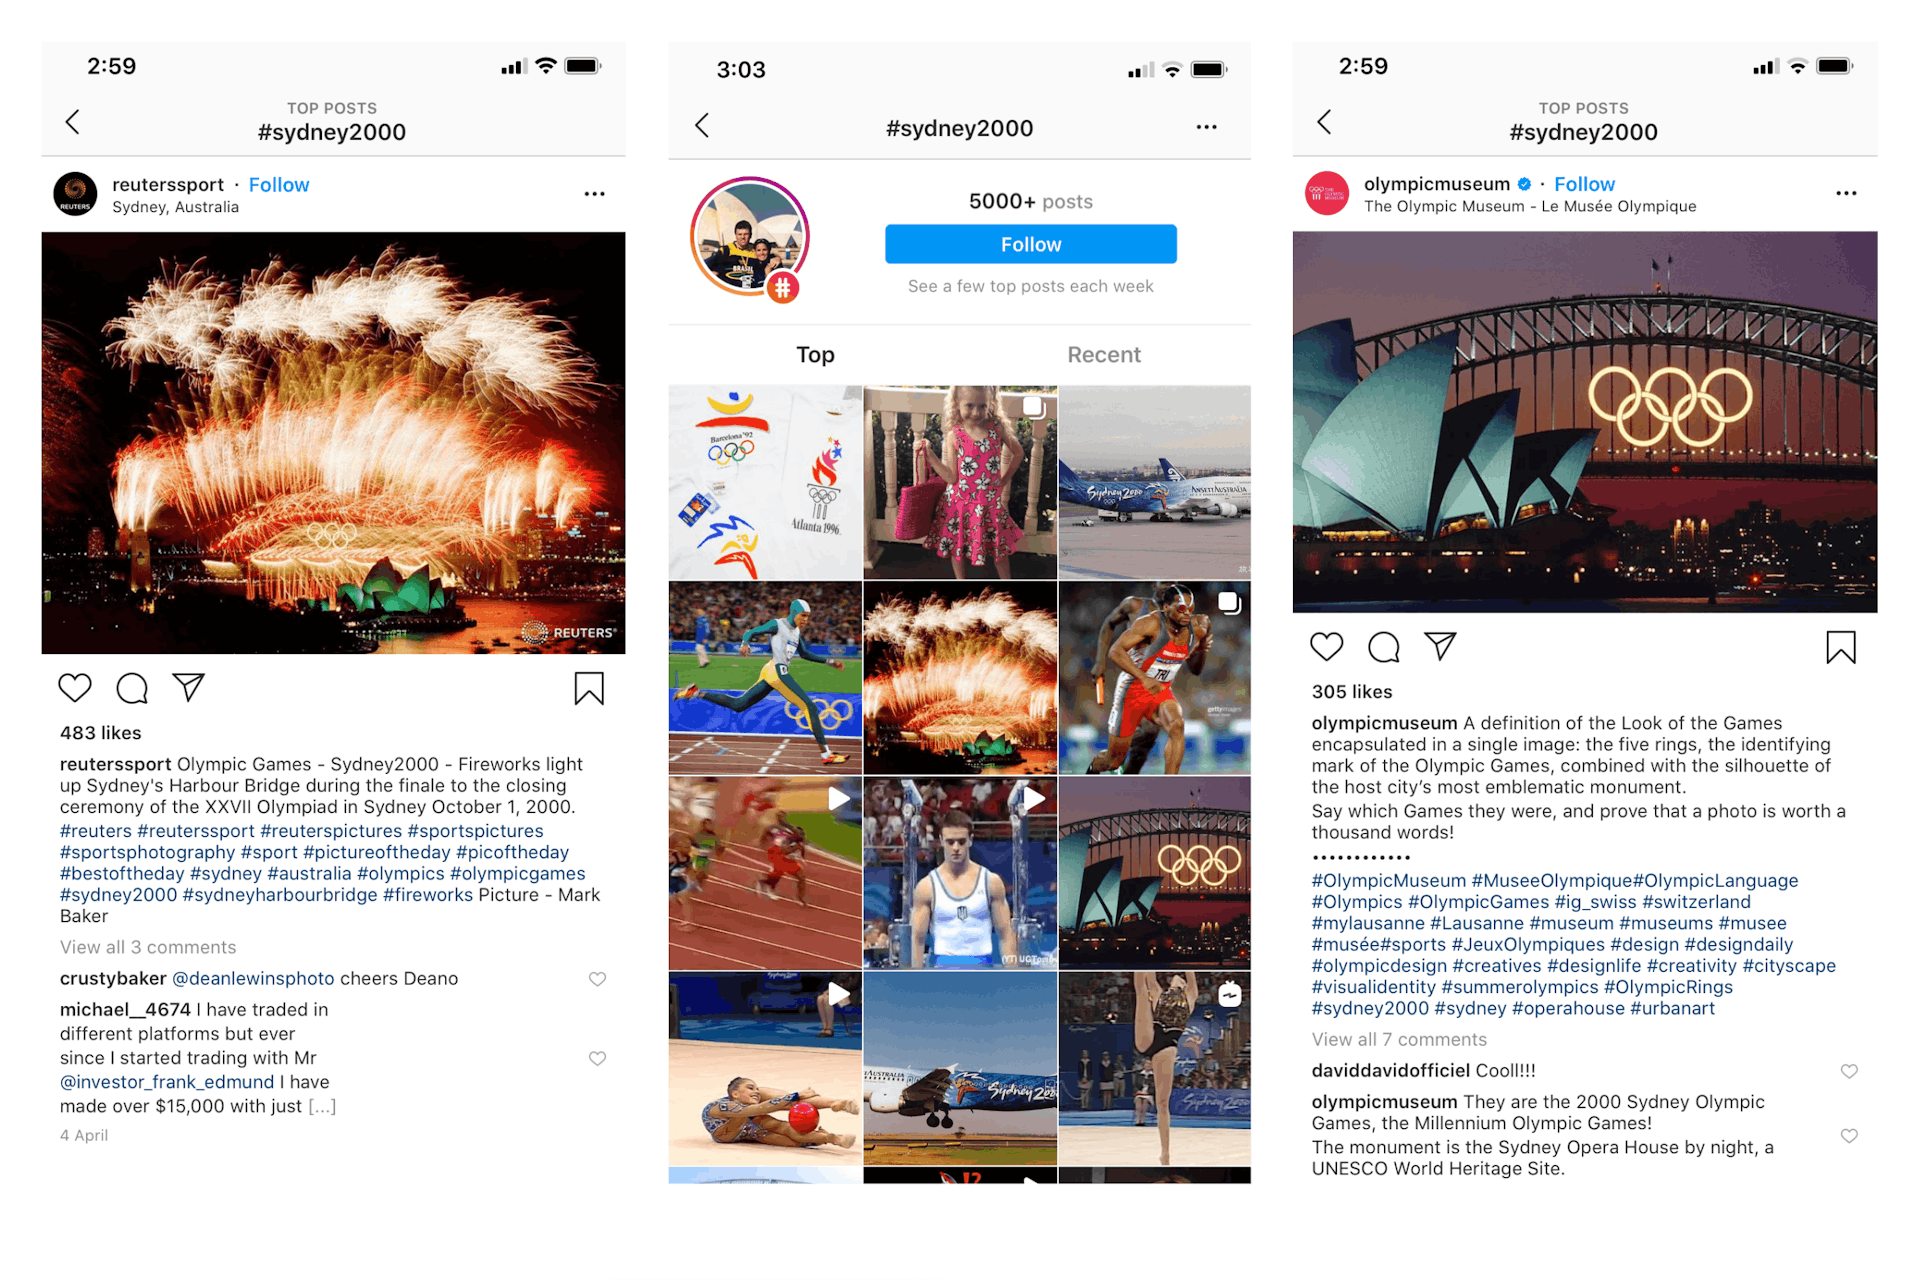 L to R: A post made by Reuters commemorating the 2000 Sydney Olympics, the hashtag feed for that tag, a post by Olympic Museum referencing the Sydney Olympics